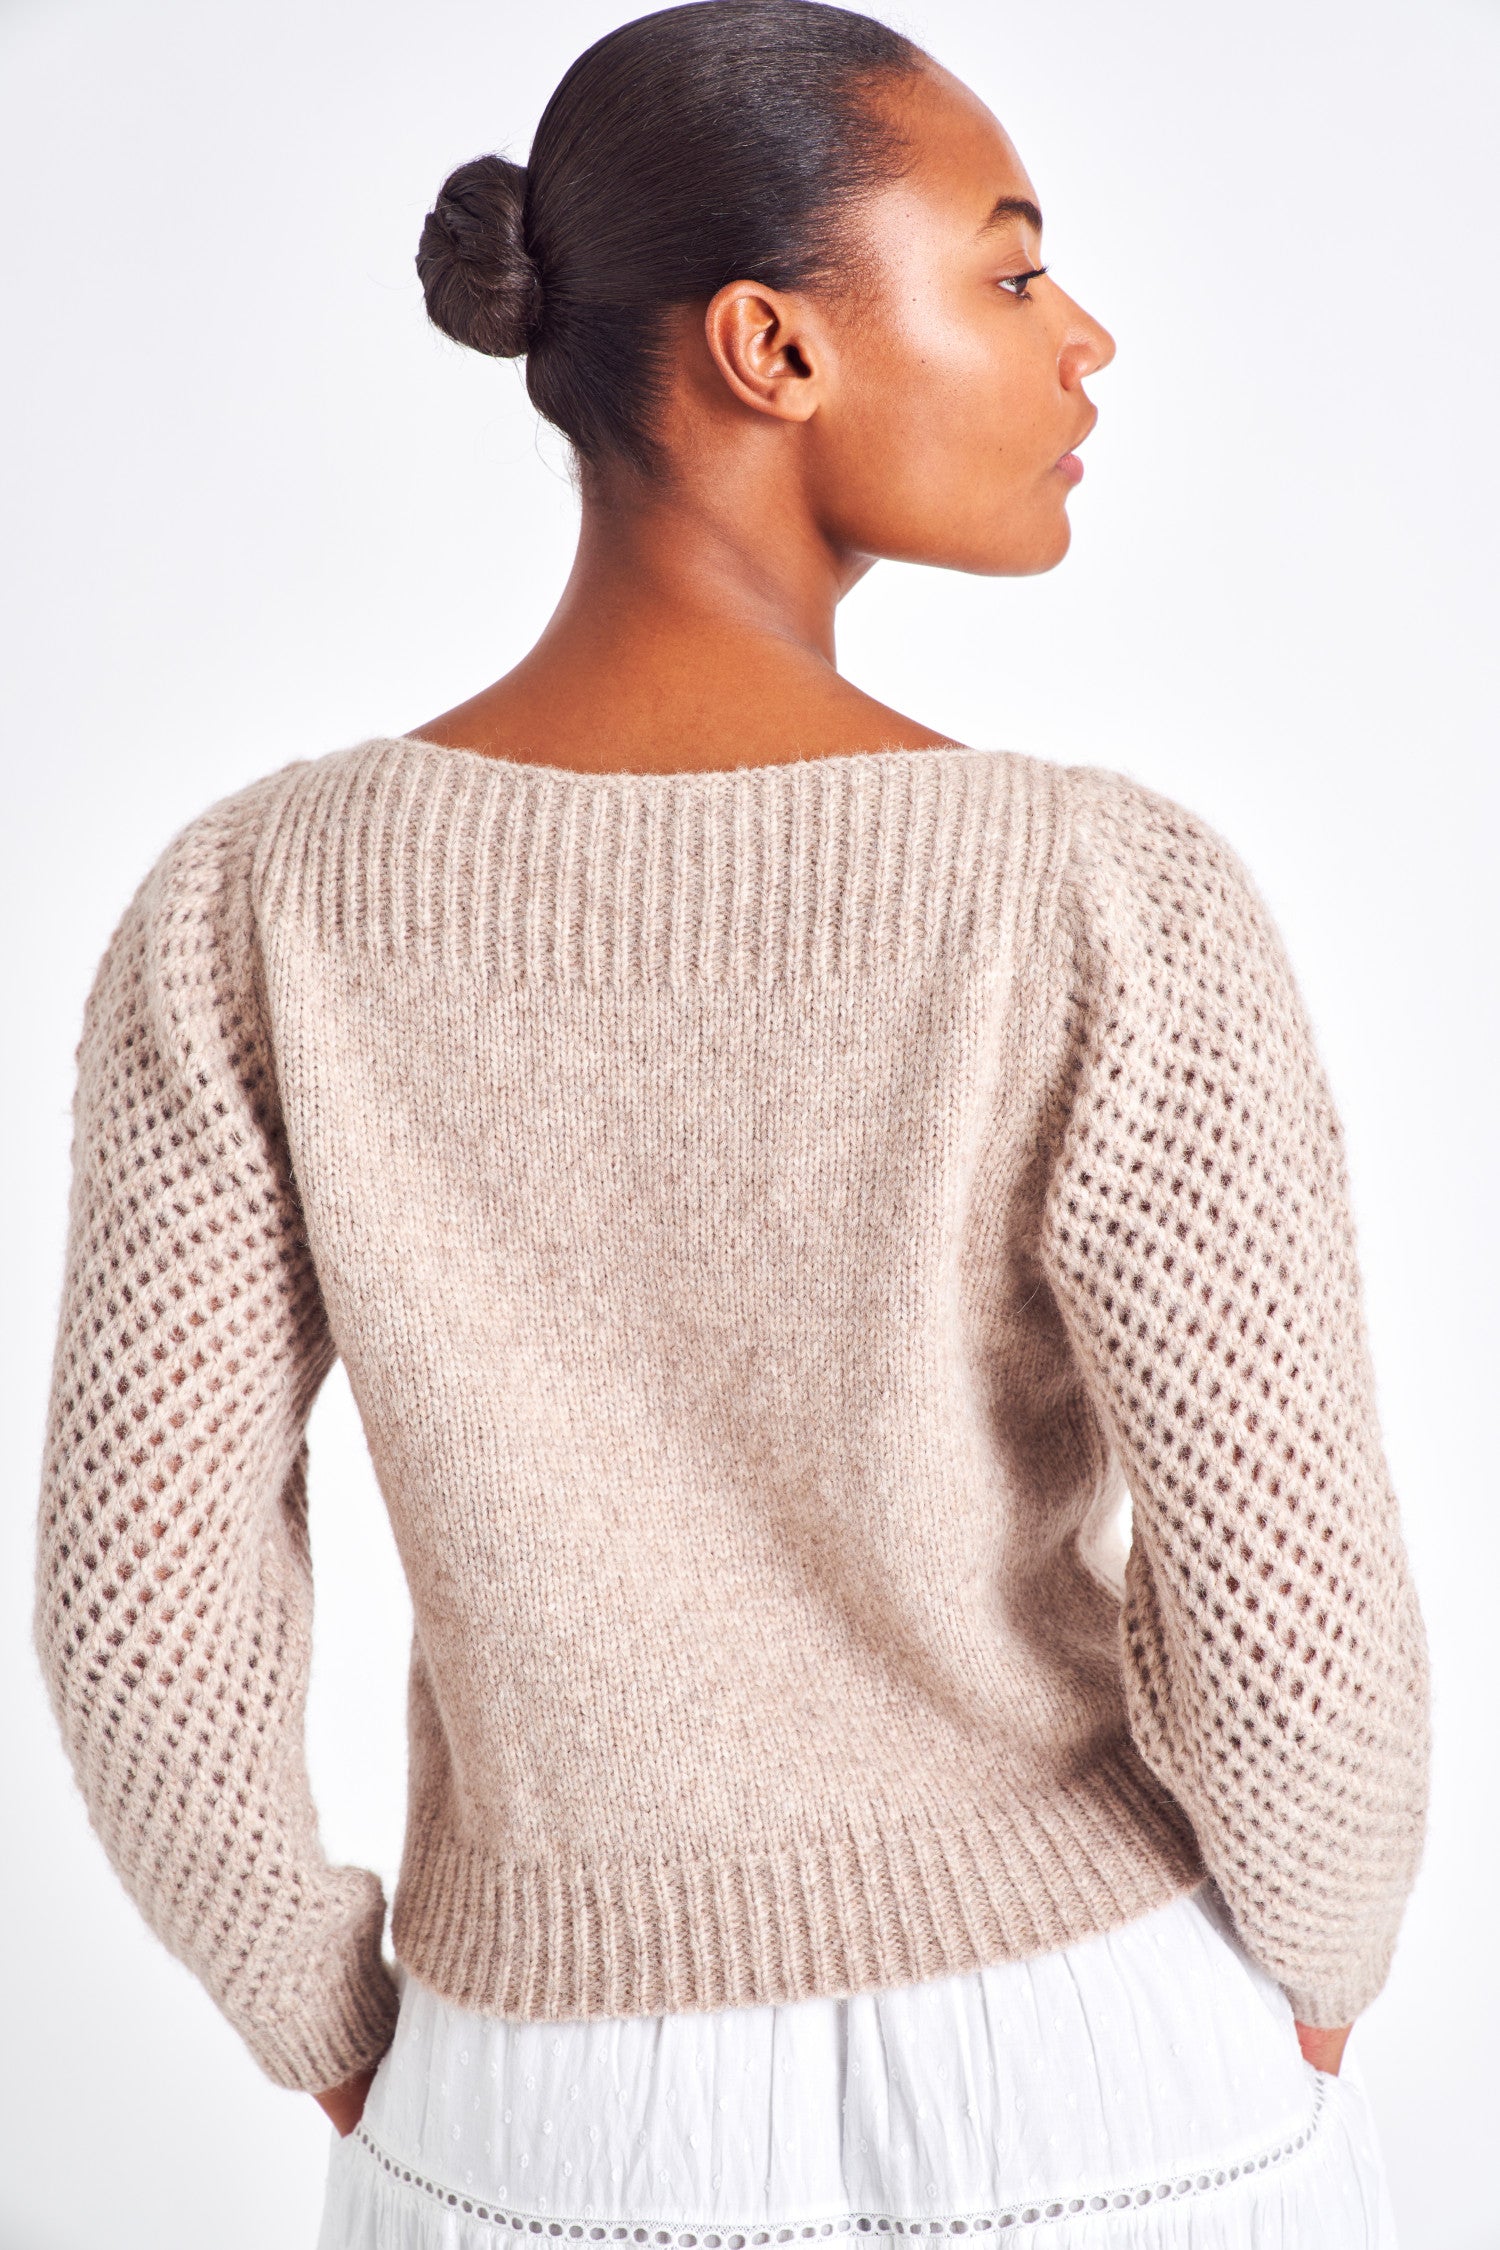 The Rosie oatmeal pullover is made from baby alpaca while being extremely light and full with a chunky look. It has a straight rib neckline and a straight body with rib finishing. It is an open knit weave with a puffy shoulder that slims out at the bottom. 